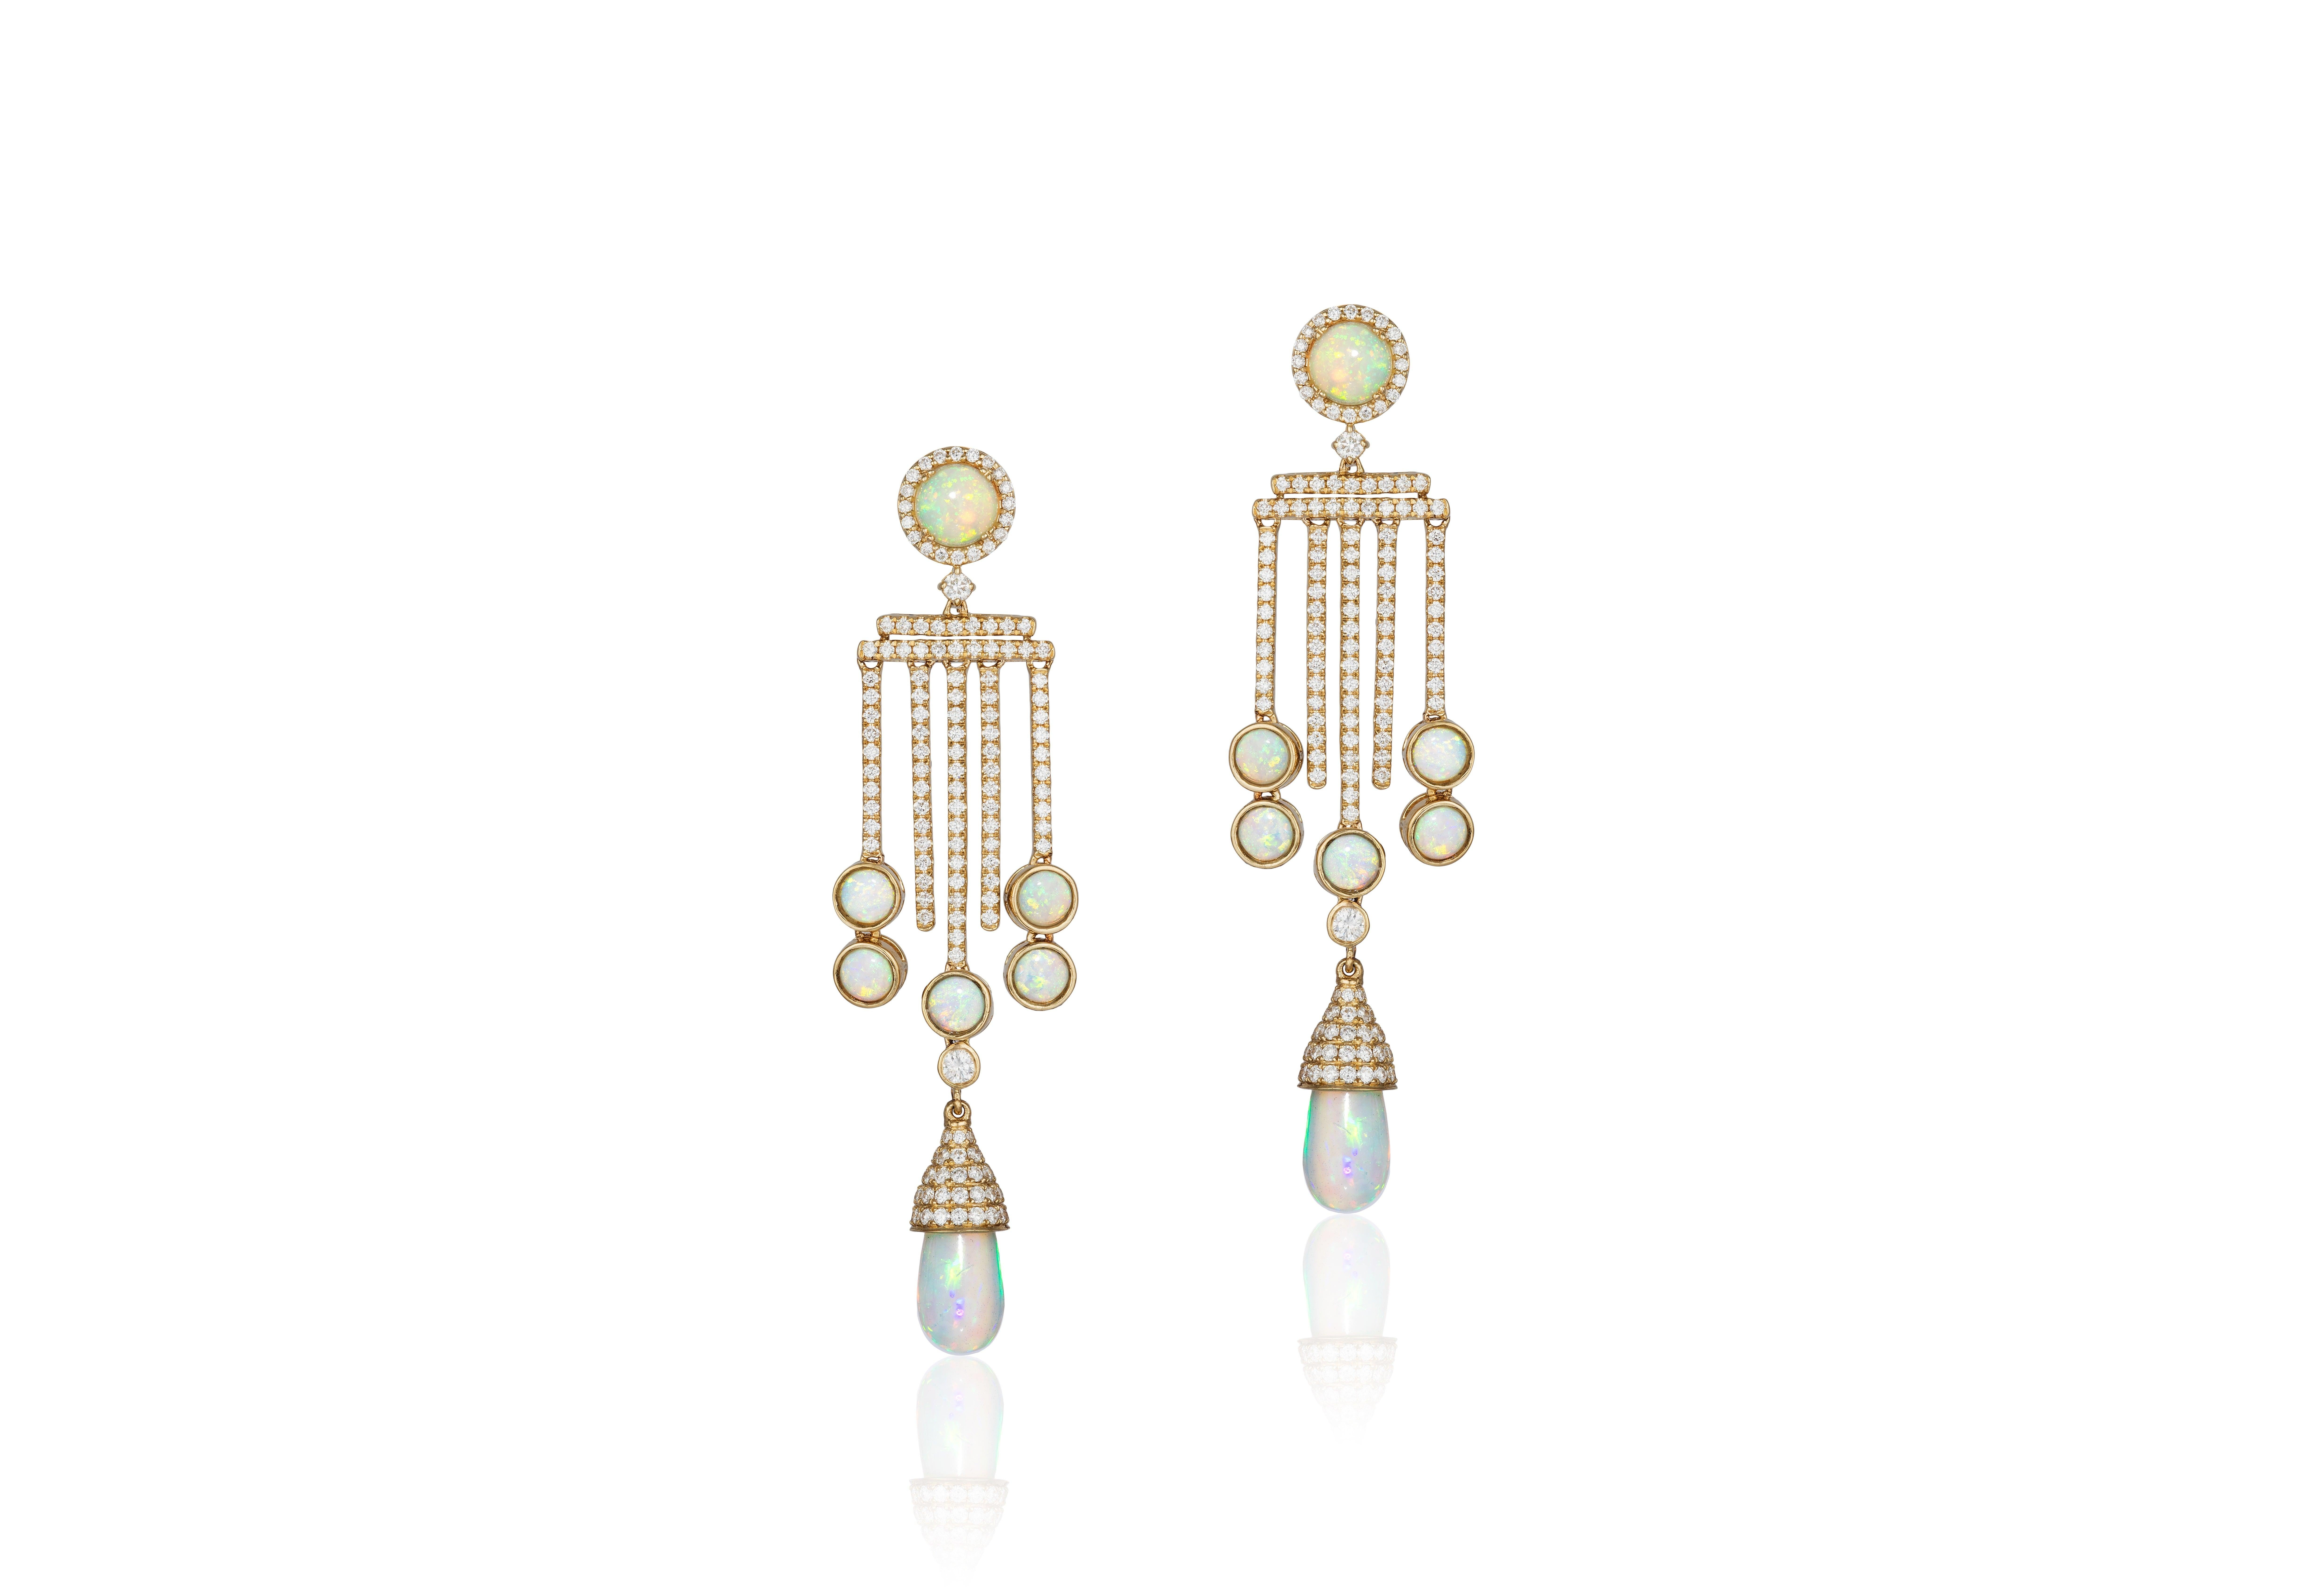 Cabochon Goshwara Opal Drop And Cab With Diamond Earrings